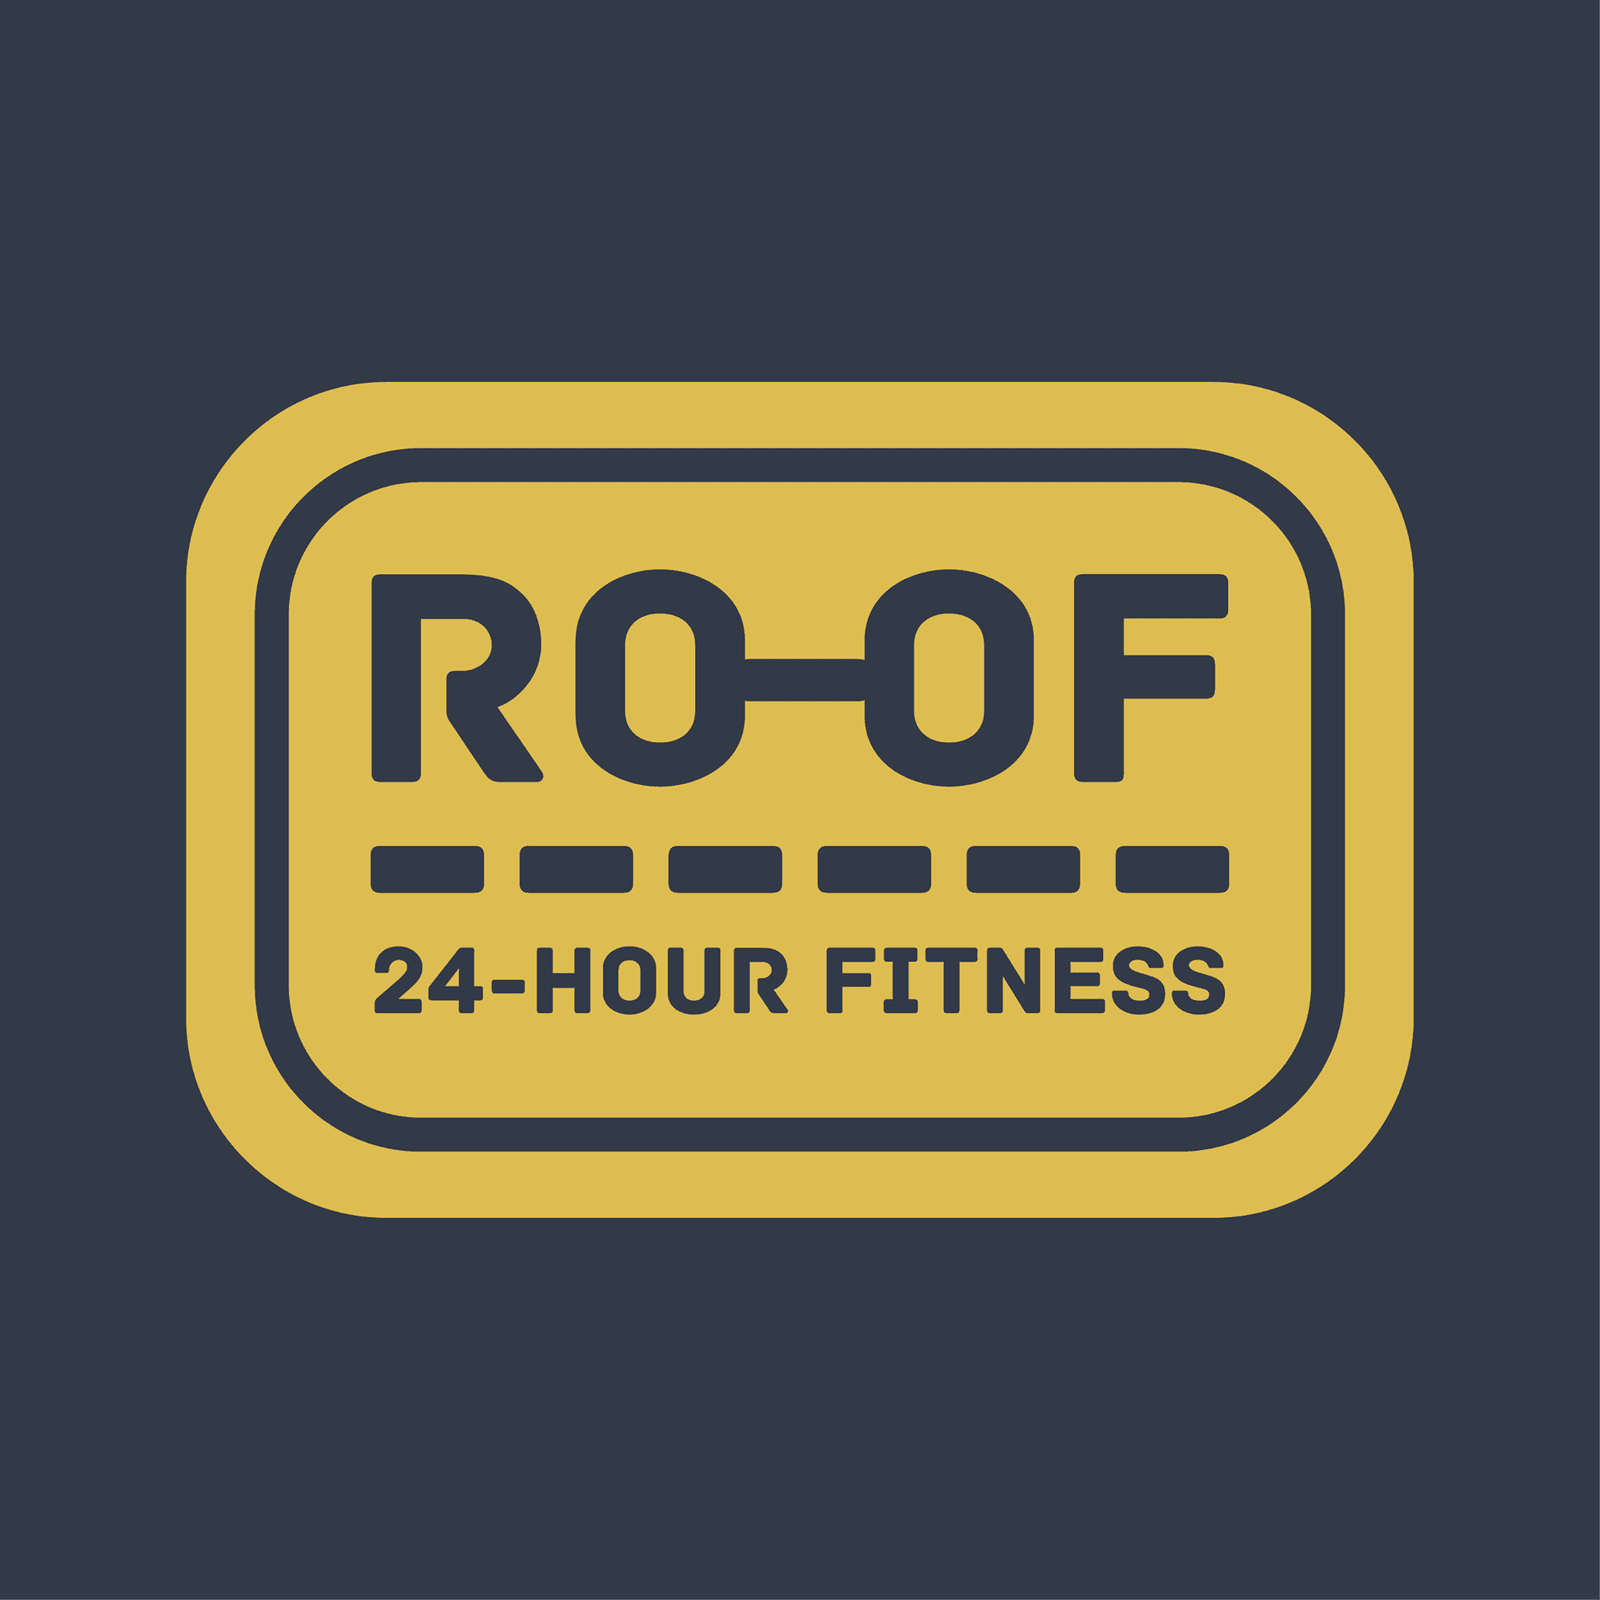 Roof 24-hour Fitness